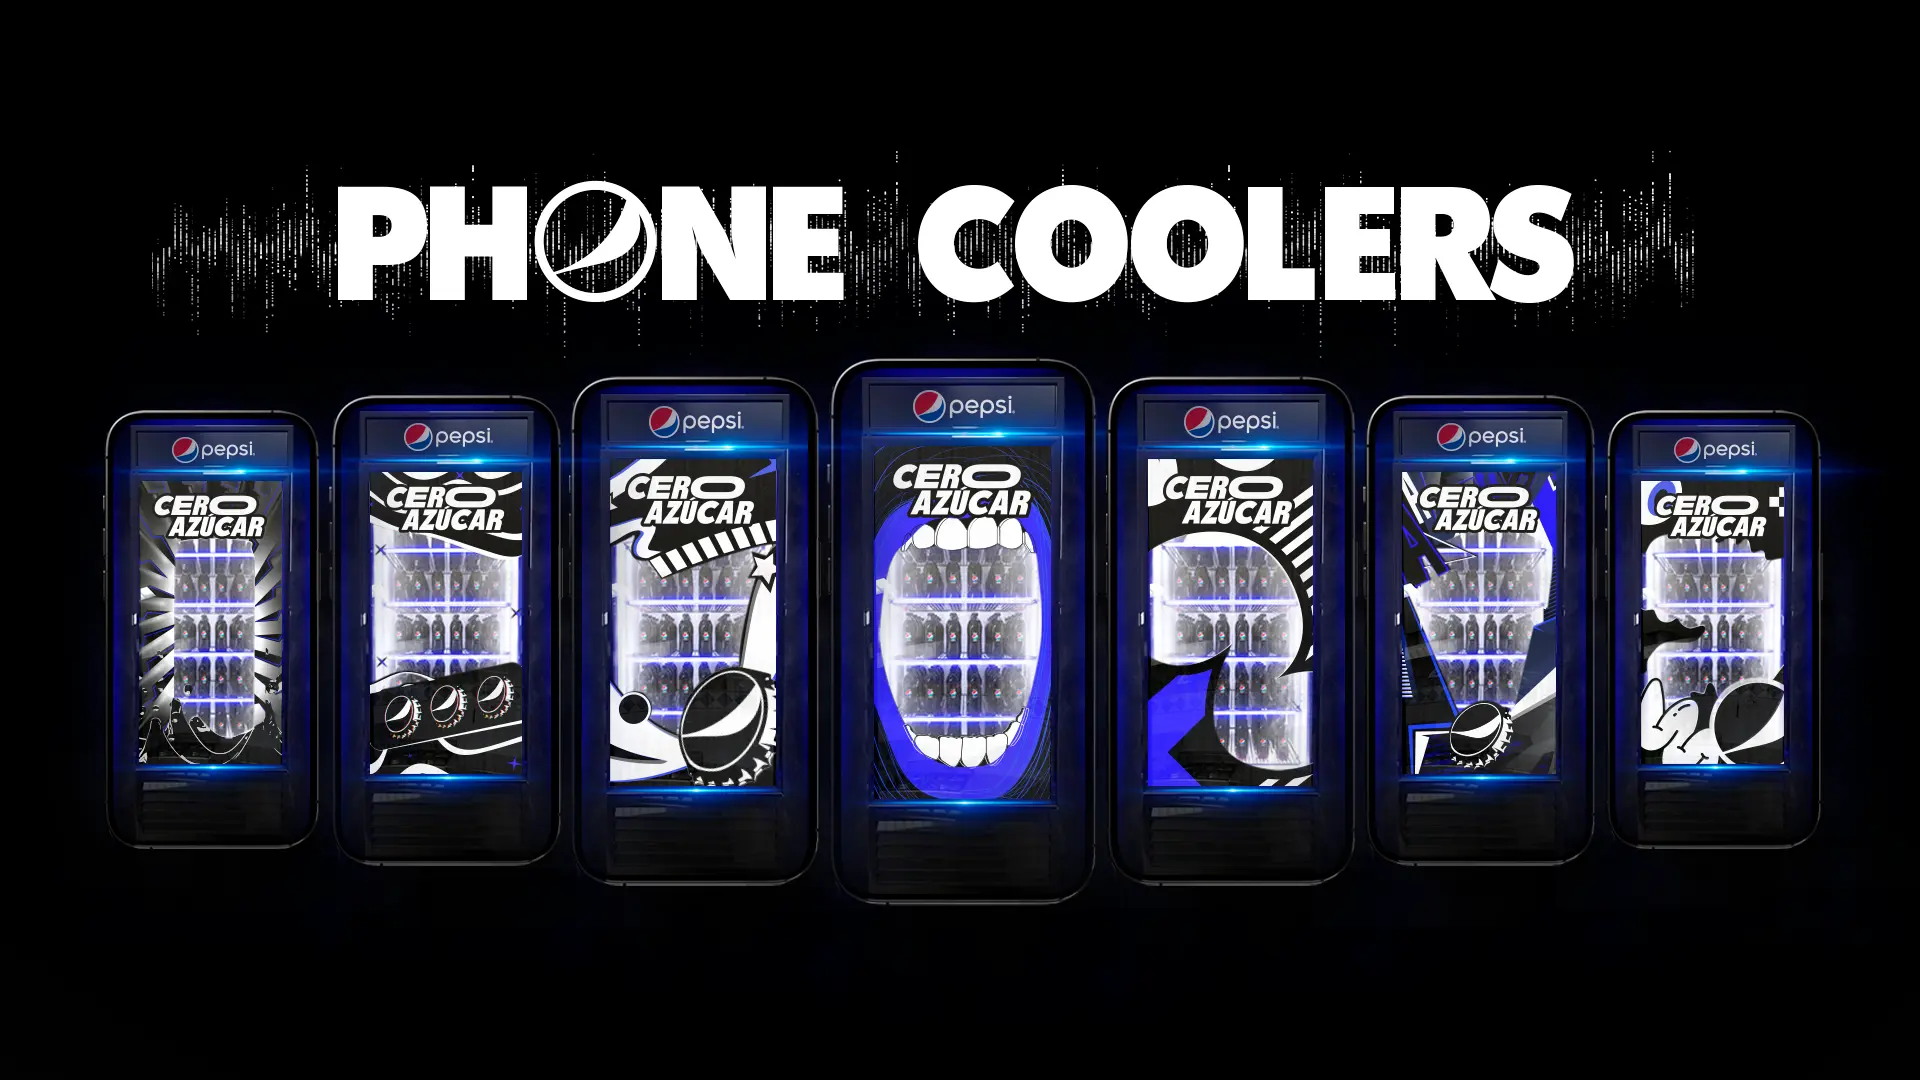 Pepsi's Innovative "Phone Coolers" Campaign: Say Goodbye to Smartphone Overheating Woes Ajax Household Cleaner Campaigns of the World®